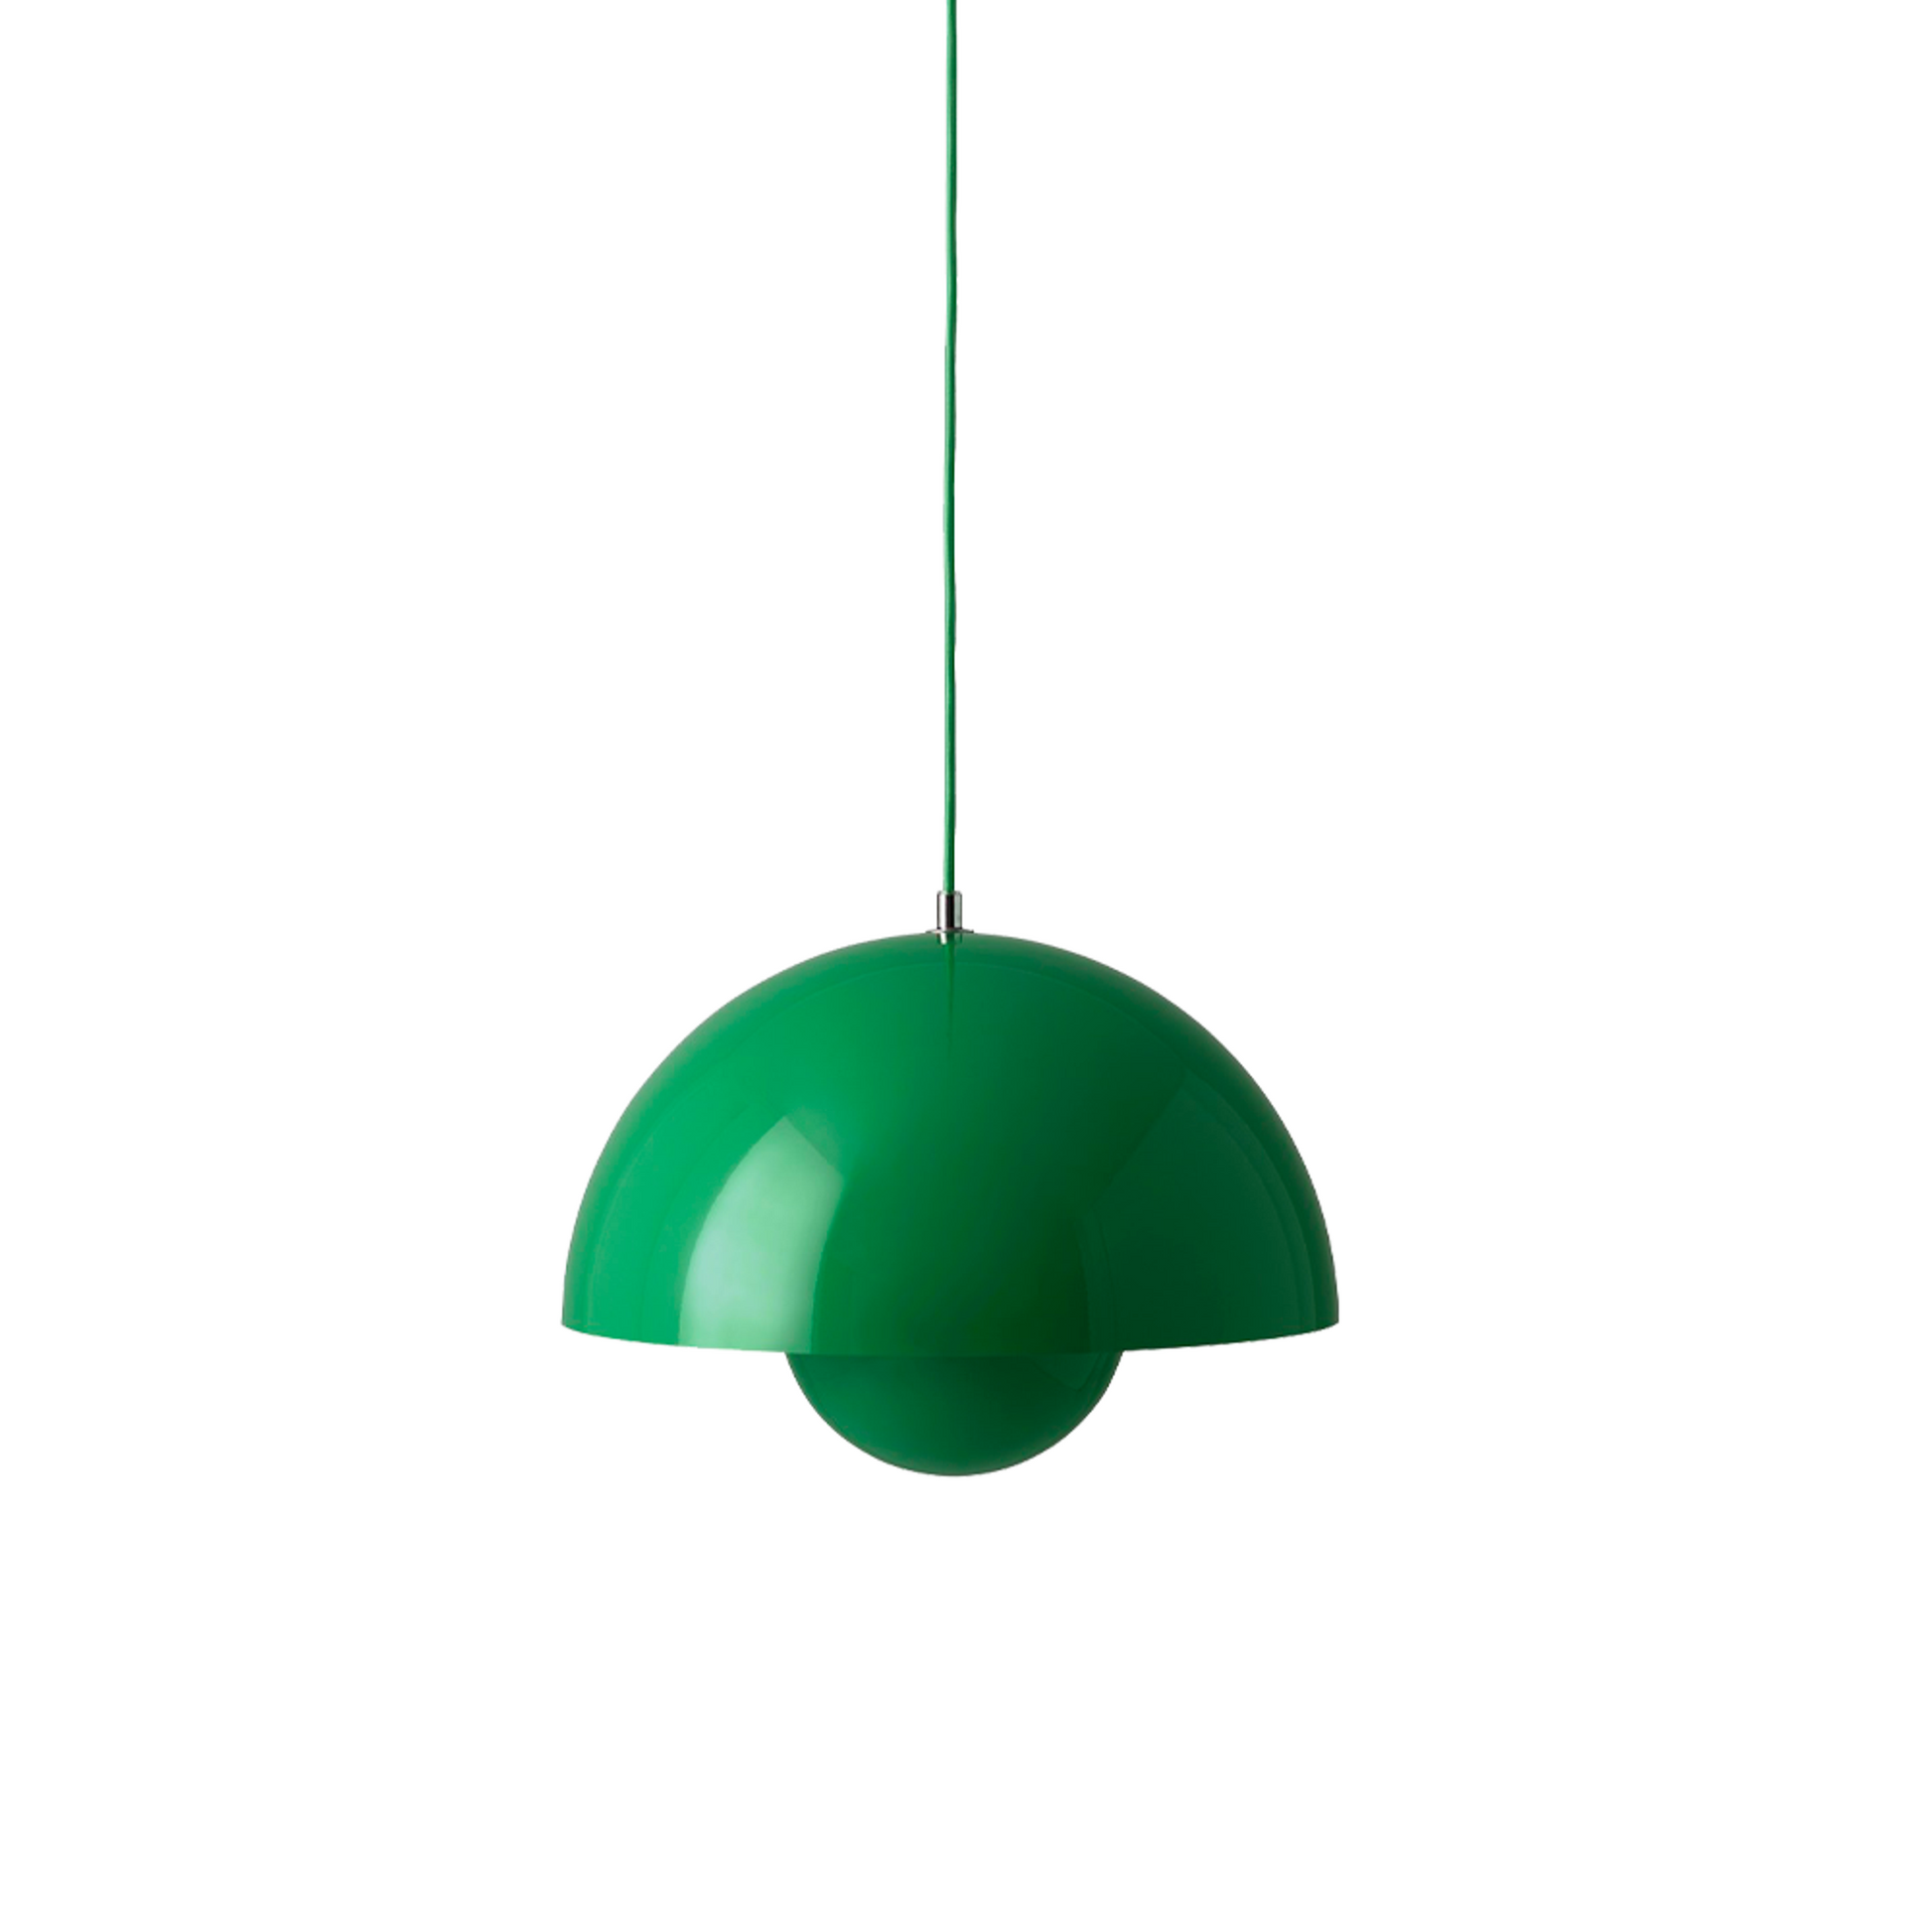 Flowerpot VP7 Pendant Lamp by &tradition #Signal Green